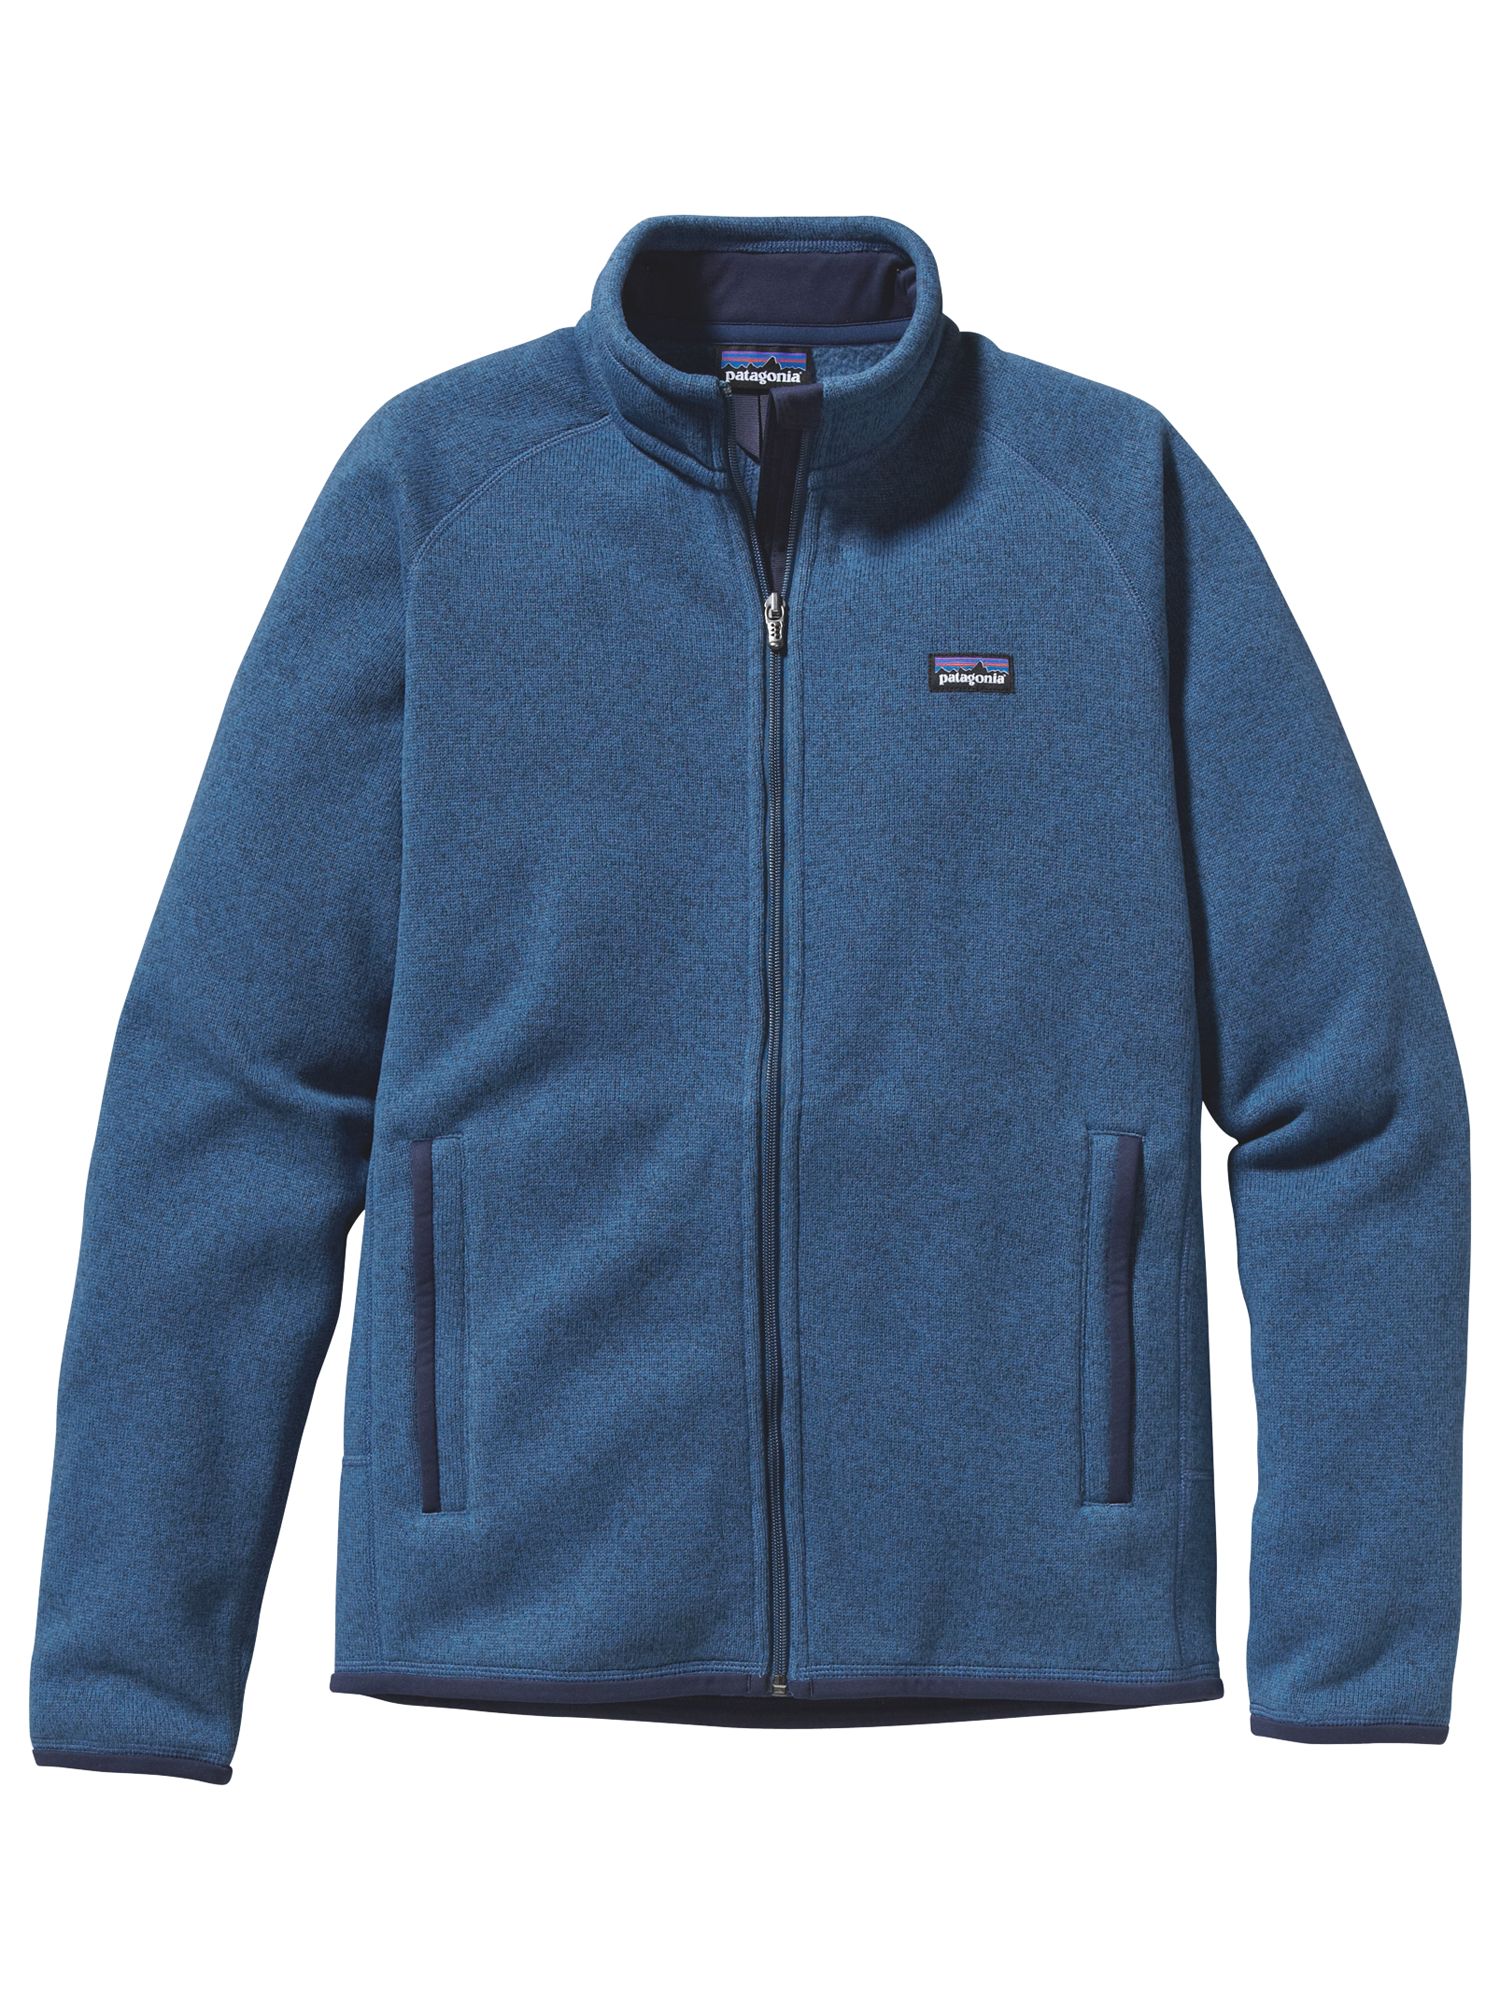 Patagonia Insulated Better Sweater™ Fleece Jacket